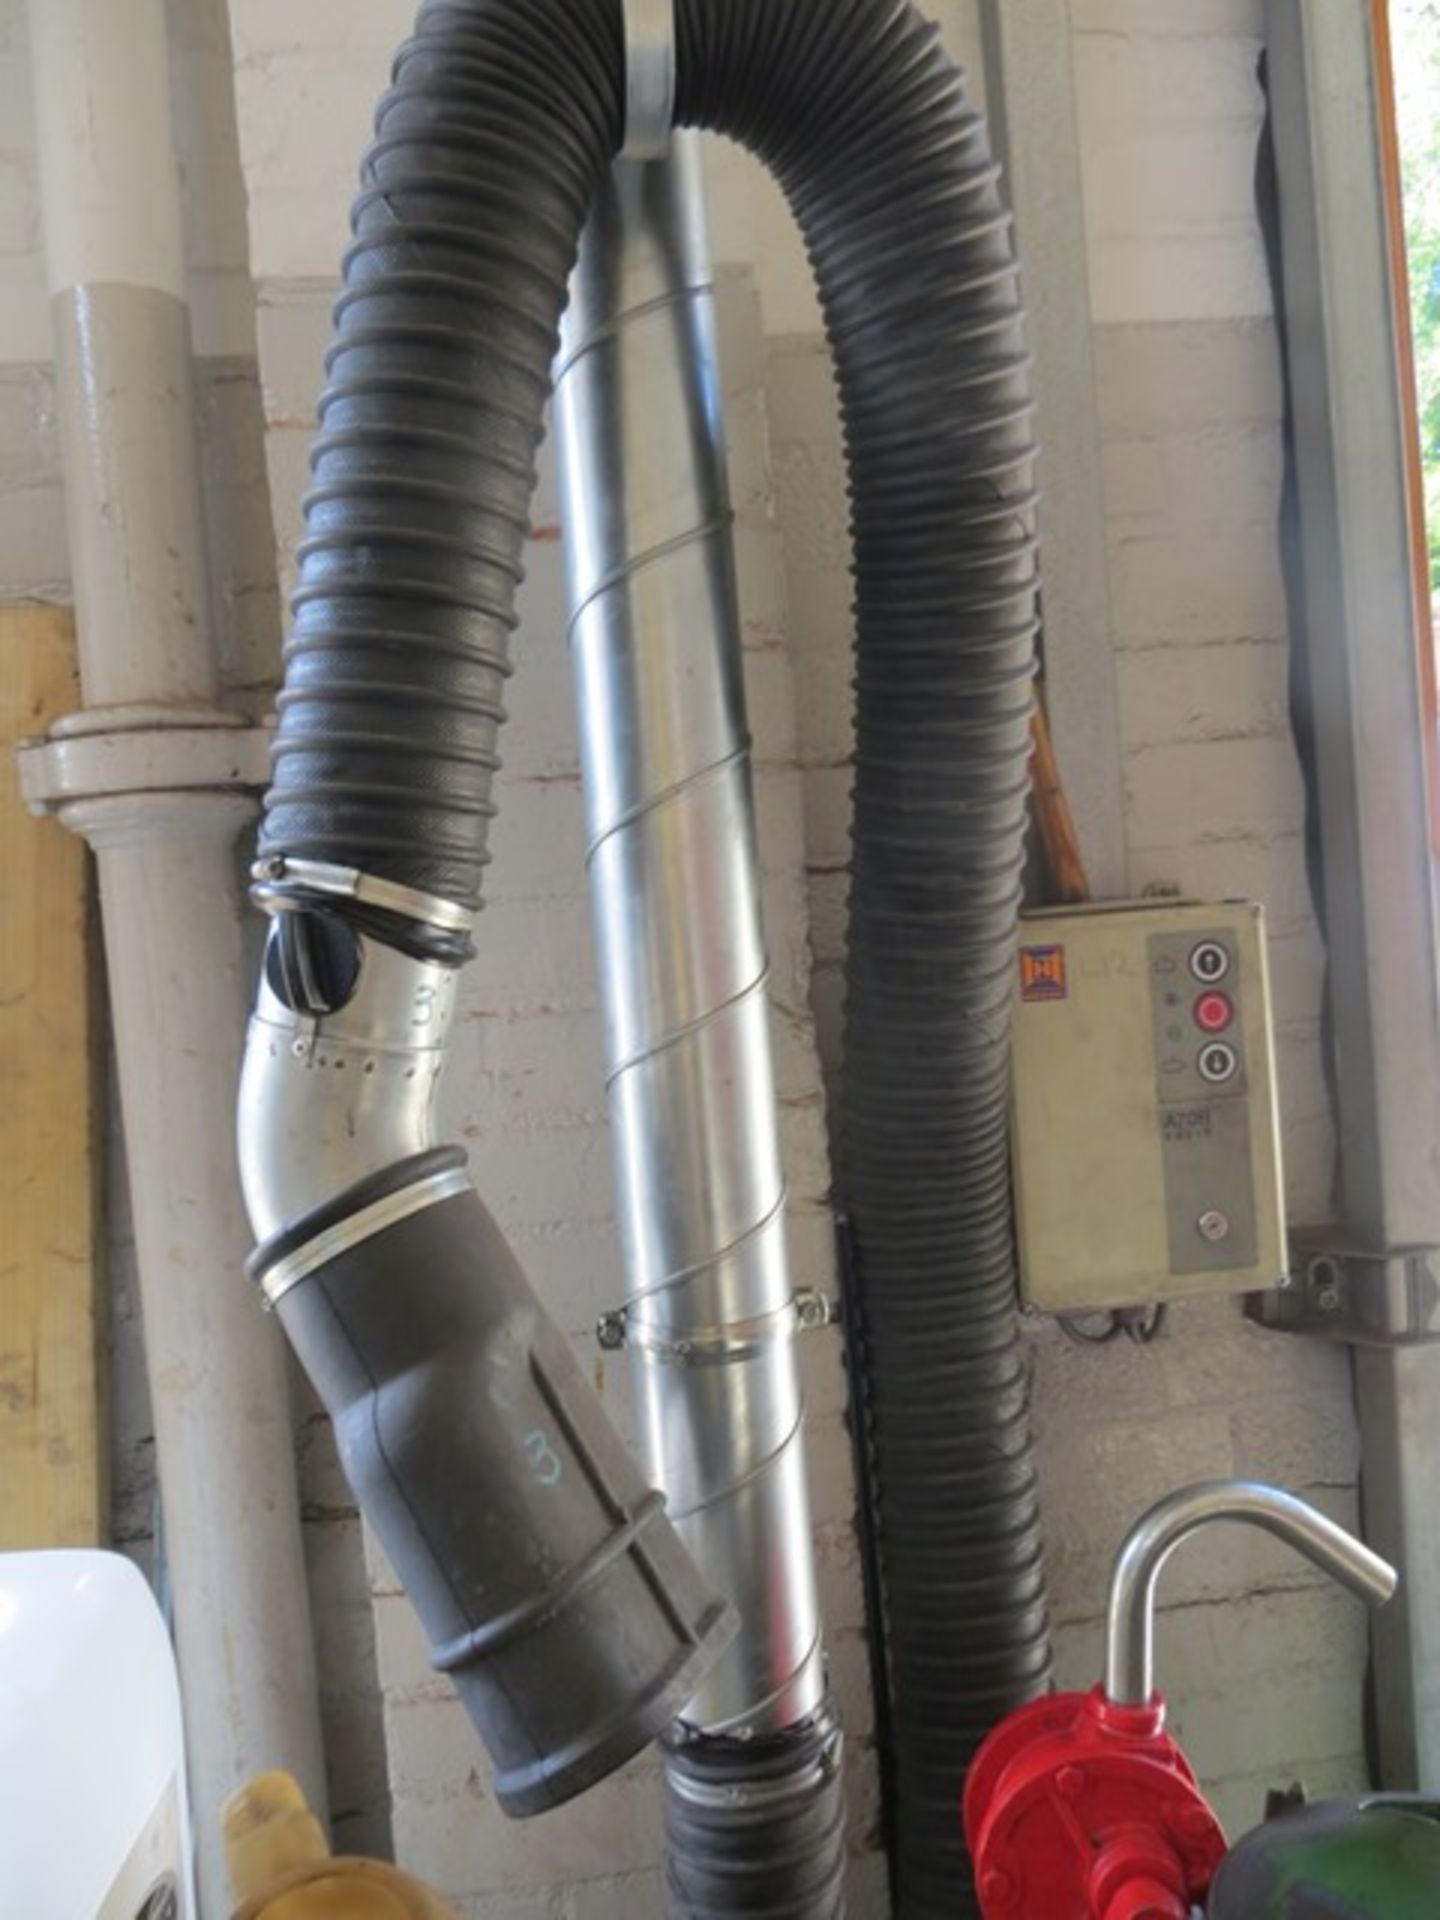 Three Exhaust extraction ducting units c/w CPN CMSENC control unit & extraction unit (please note - Image 4 of 4